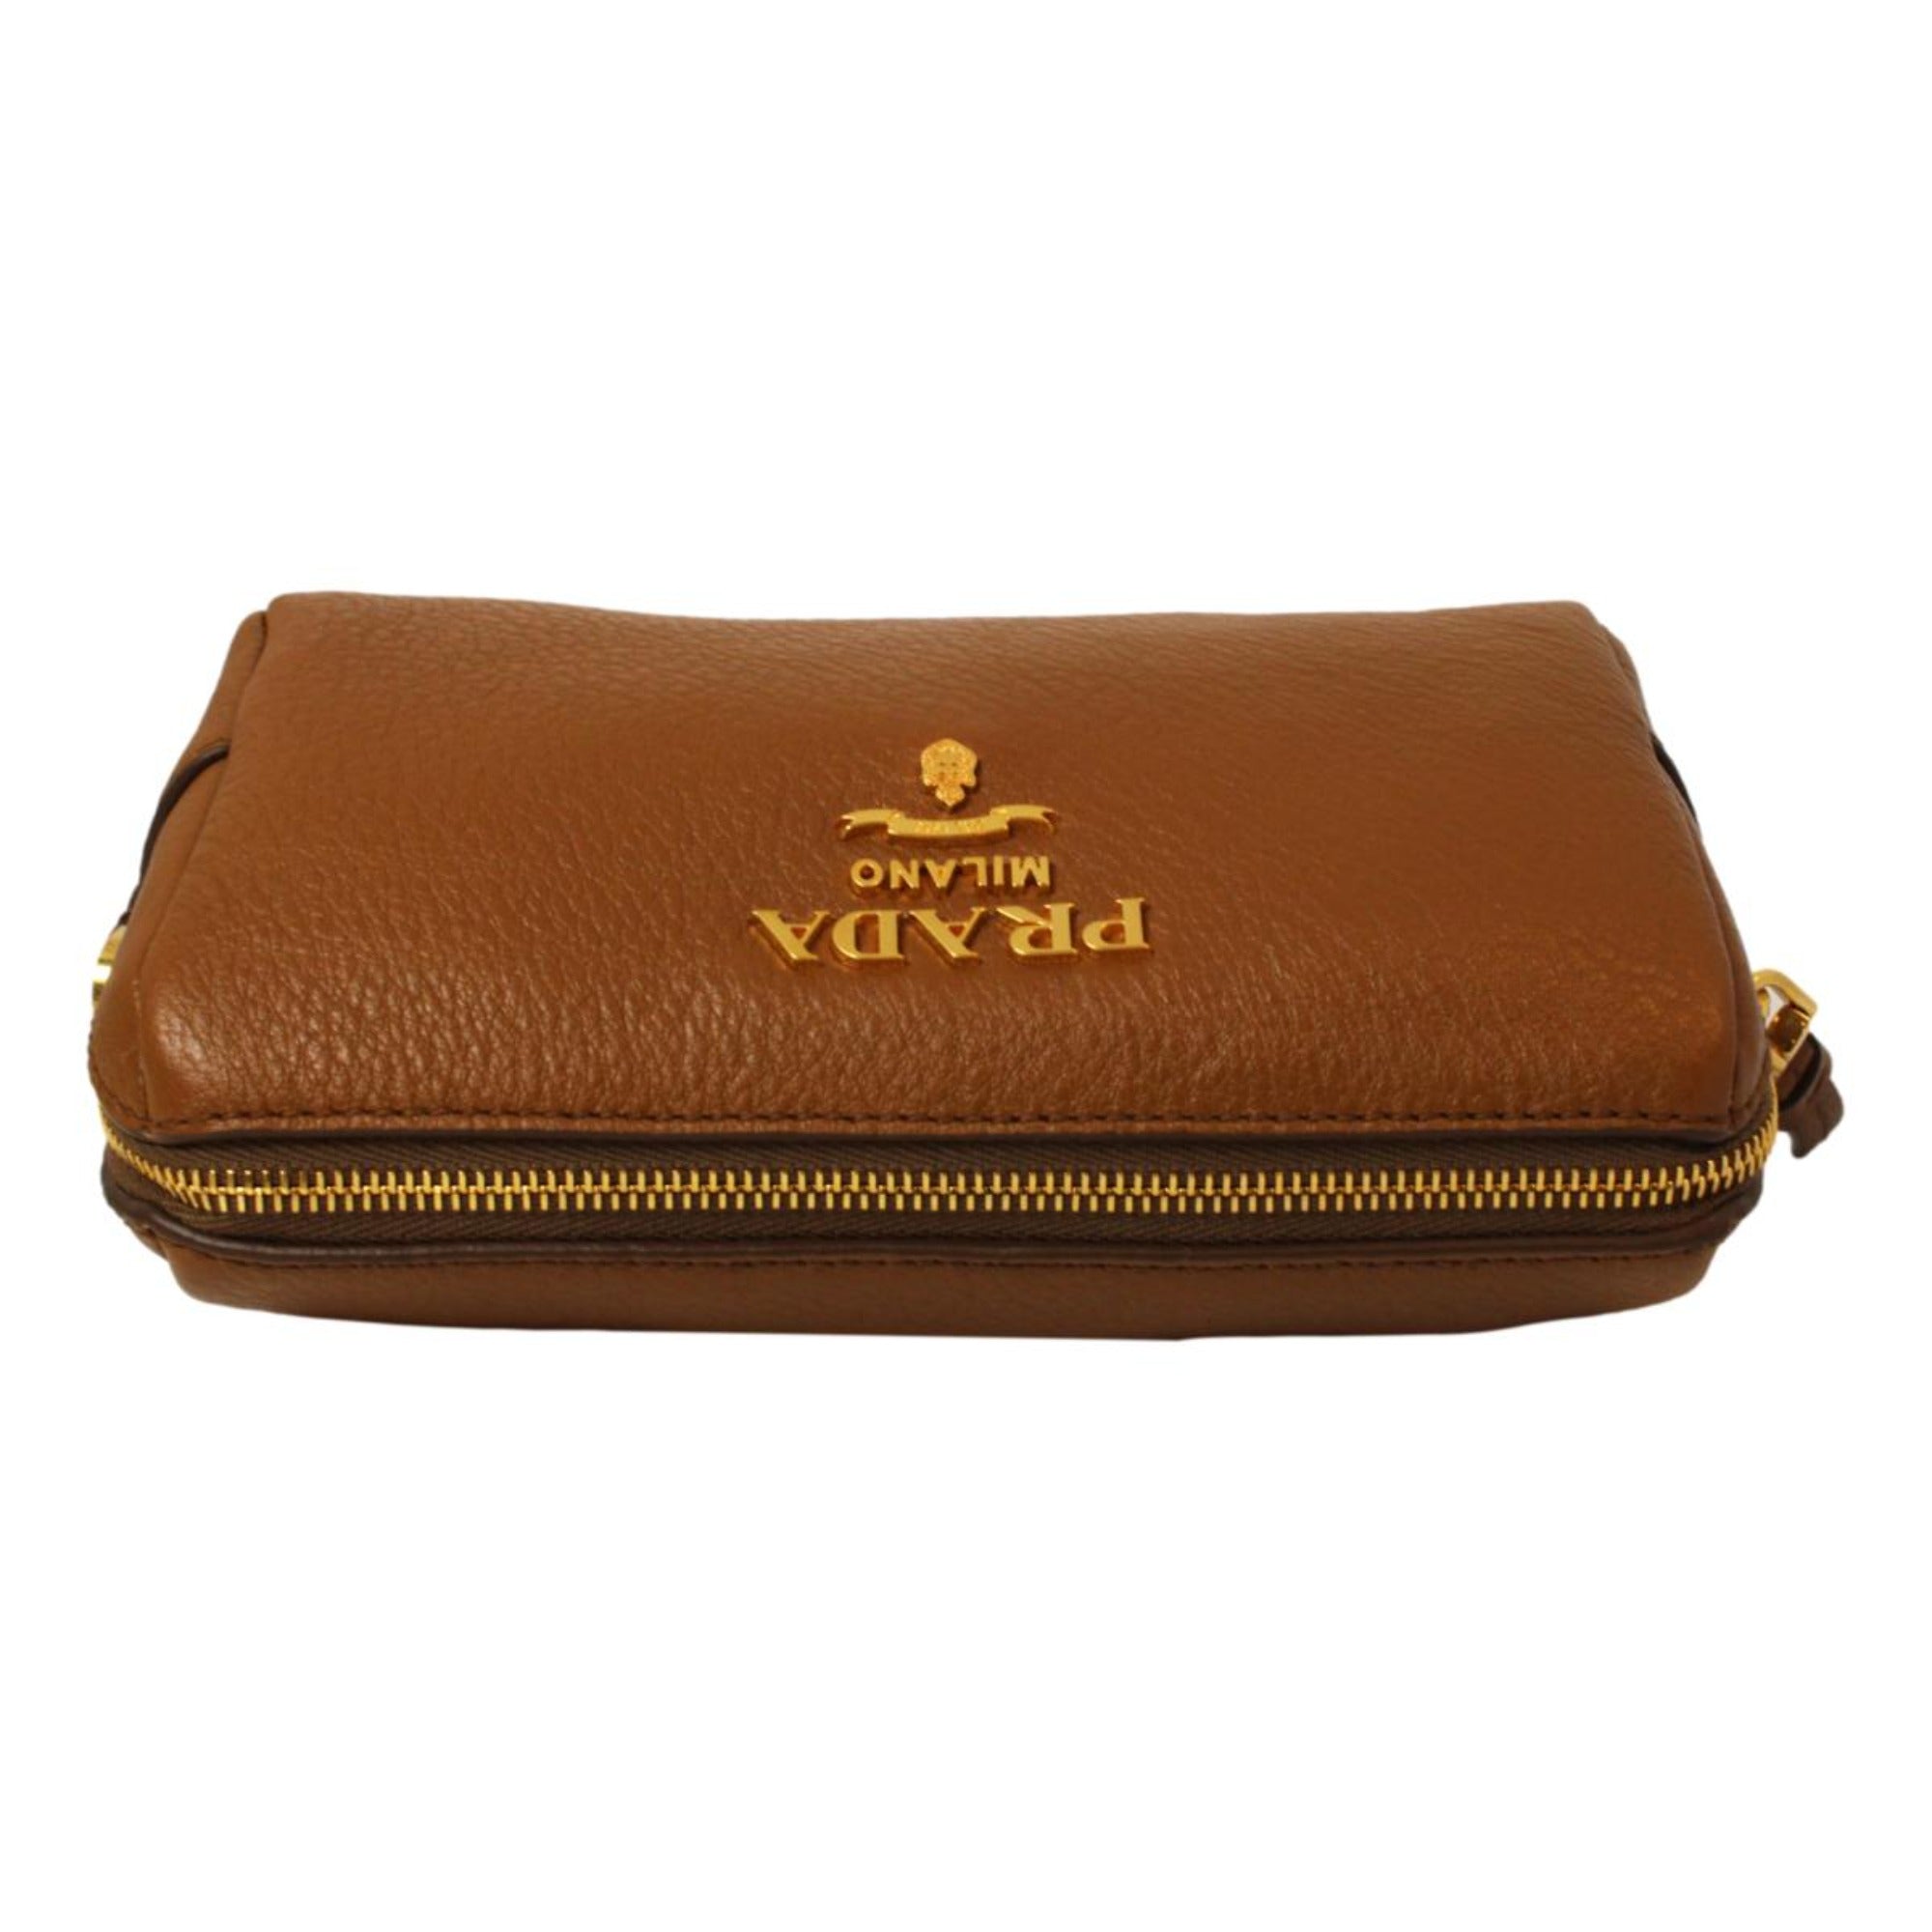 Prada Vitello Daino Cannella Brown Leather Cosmetic Pouch 1ND004 at_Queen_Bee_of_Beverly_Hills